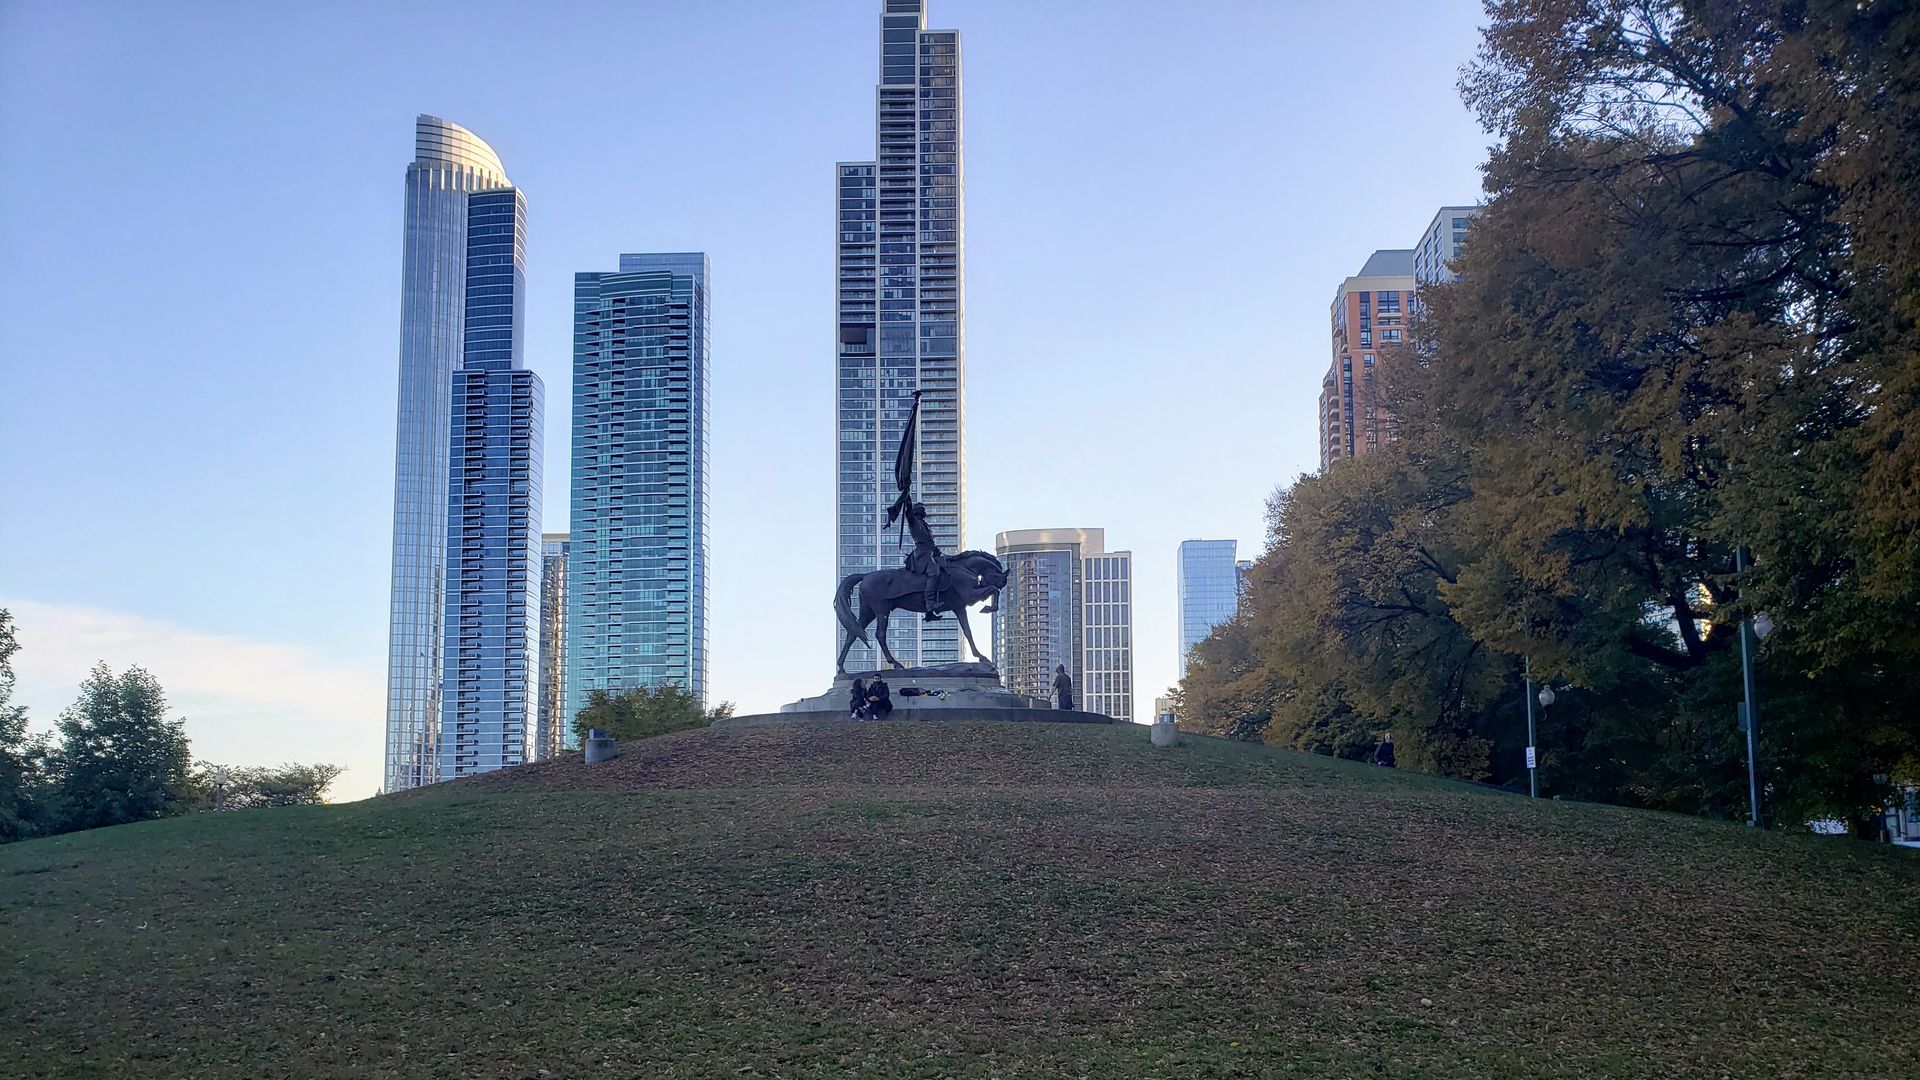 Statue on a mound in front of tall buildings 